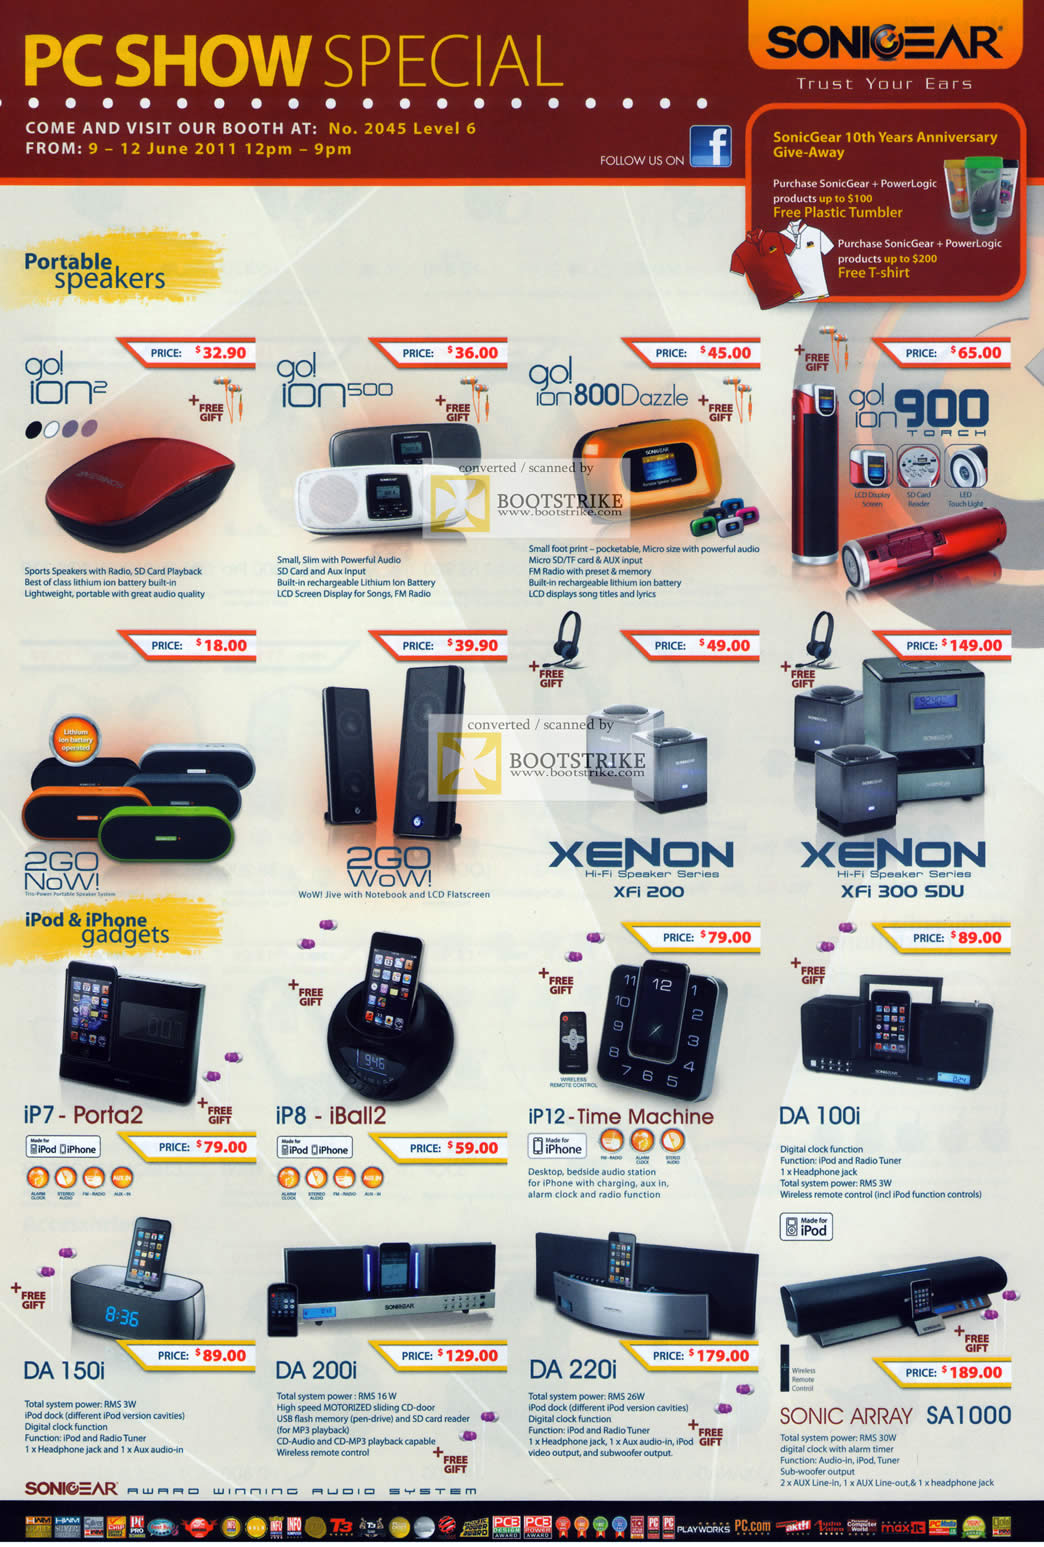 PC Show 2011 price list image brochure of Leapfrog Sonicgear Speakers Go! Ion2 Dazzle Torch 2GO Now! WoW! Xenon IP7 Porta IPod IPhone Dock 200i Time Machine Sonic Array SA1000